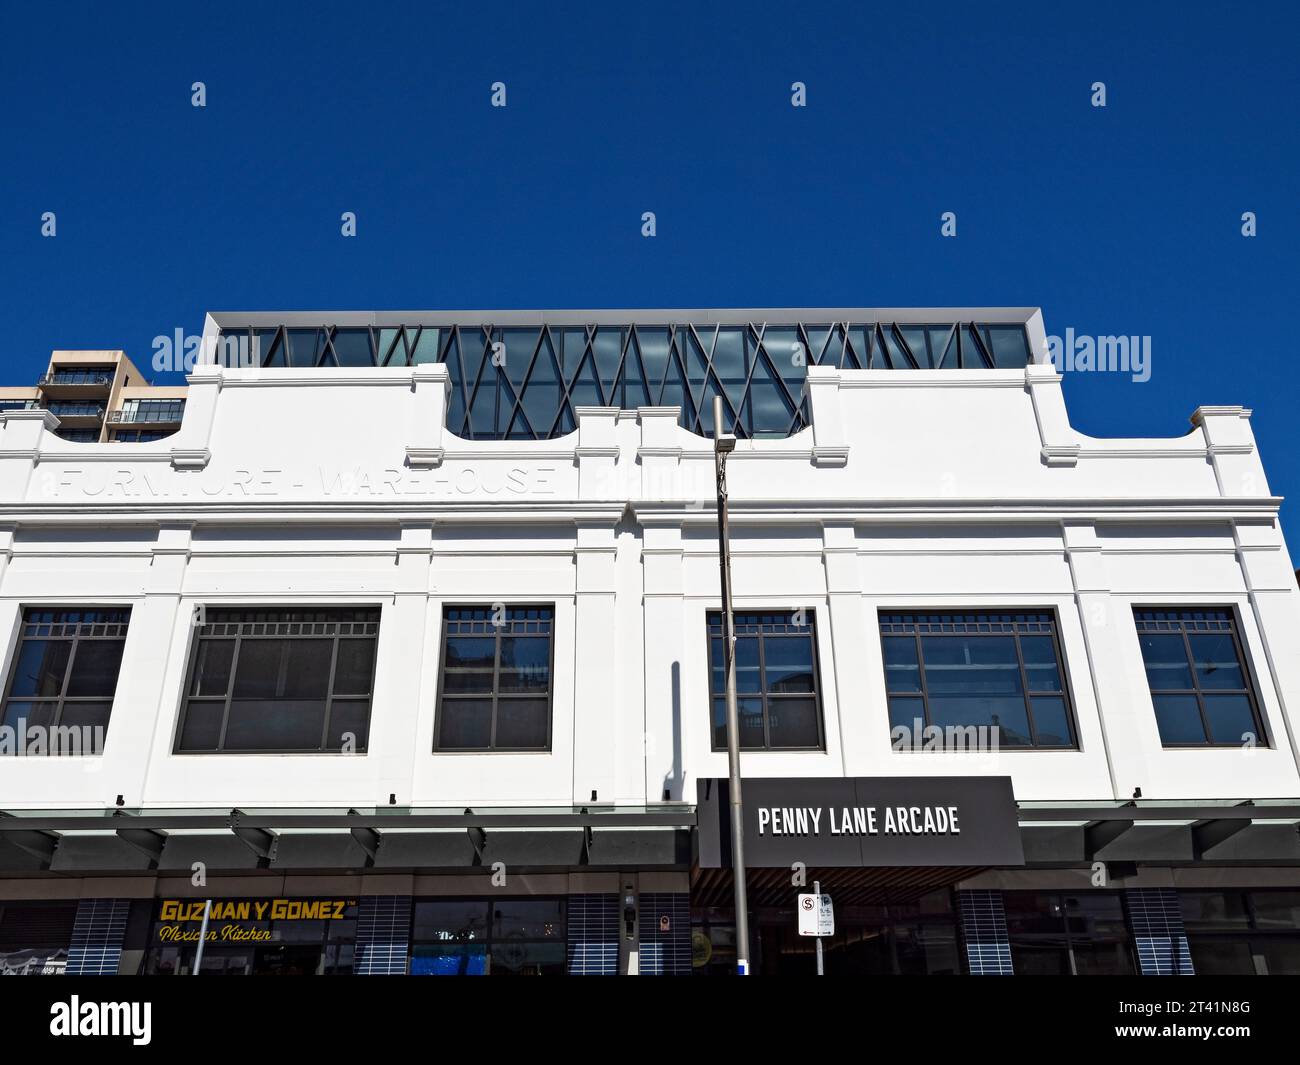 Melbourne Australia /  Penny Lane Arcade retail and prestige Penny Lane Apartments located in Puckle Street; Moonee Ponds.The Melbourne Cafe and Resta Stock Photo